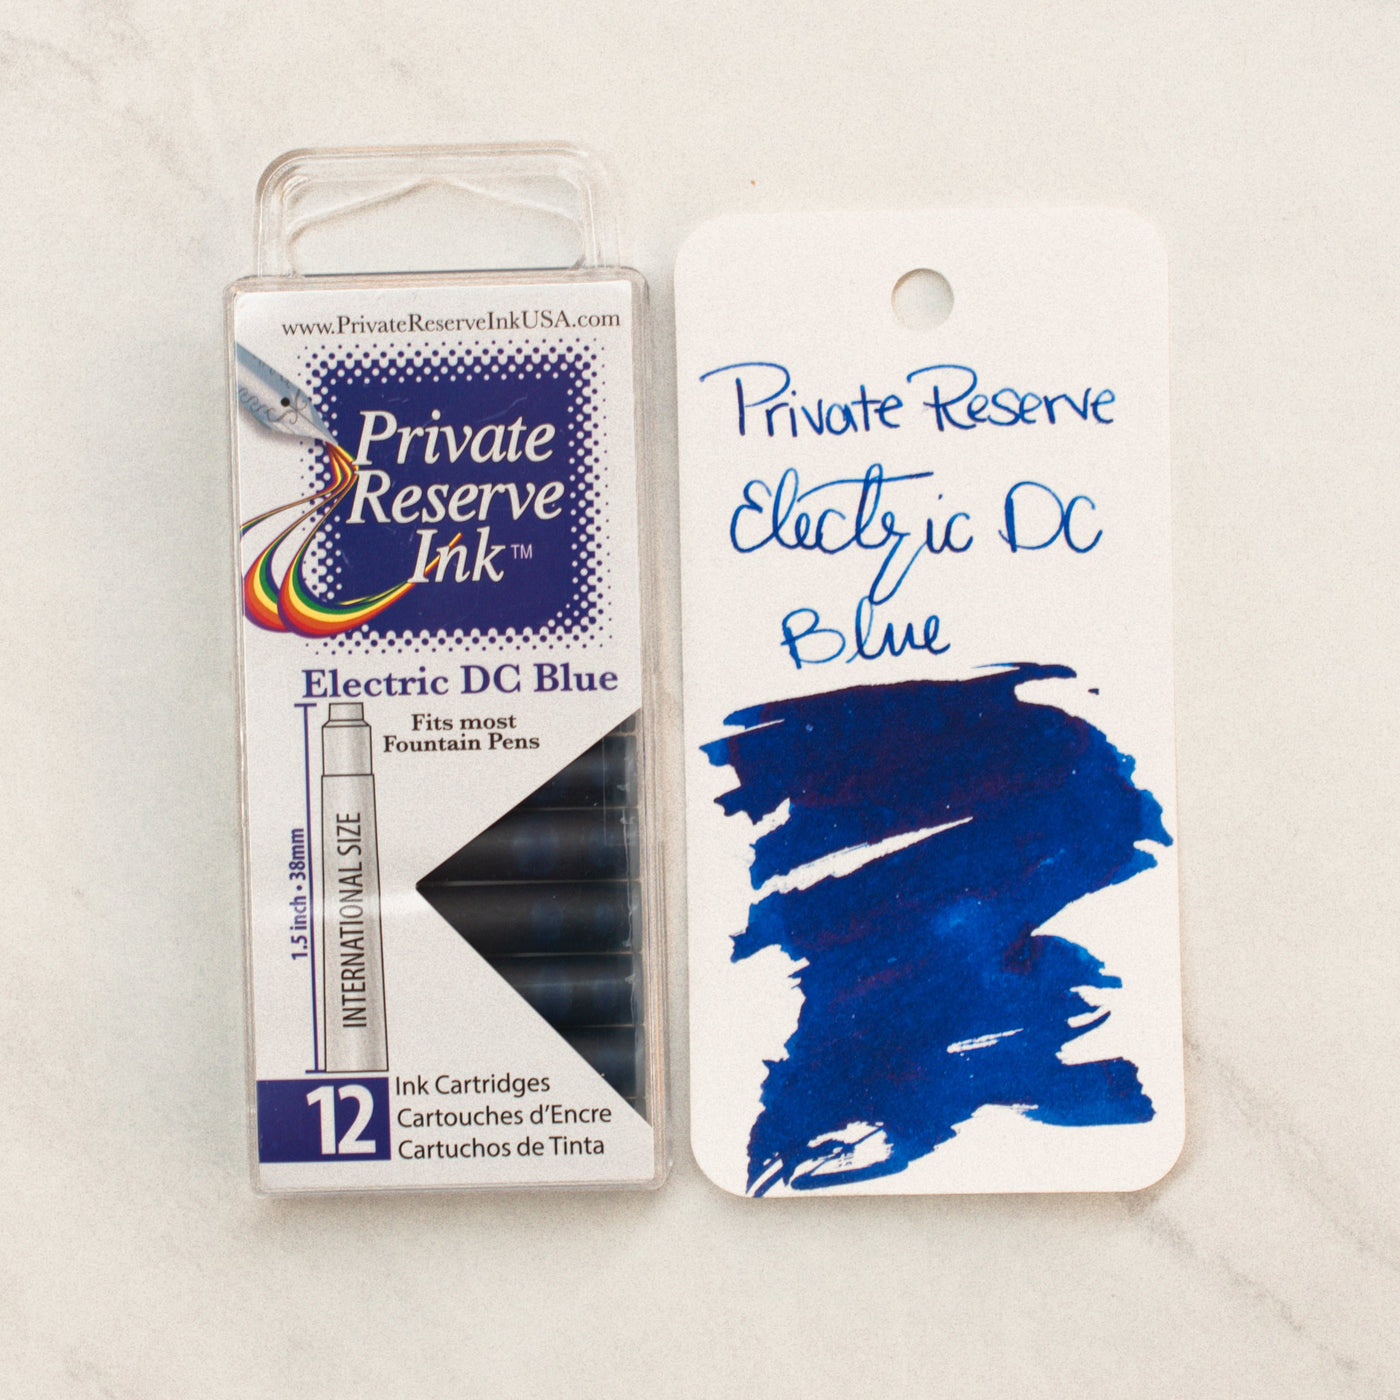 Private-Reserve-Electric-DC-Blue-Ink-Cartridges